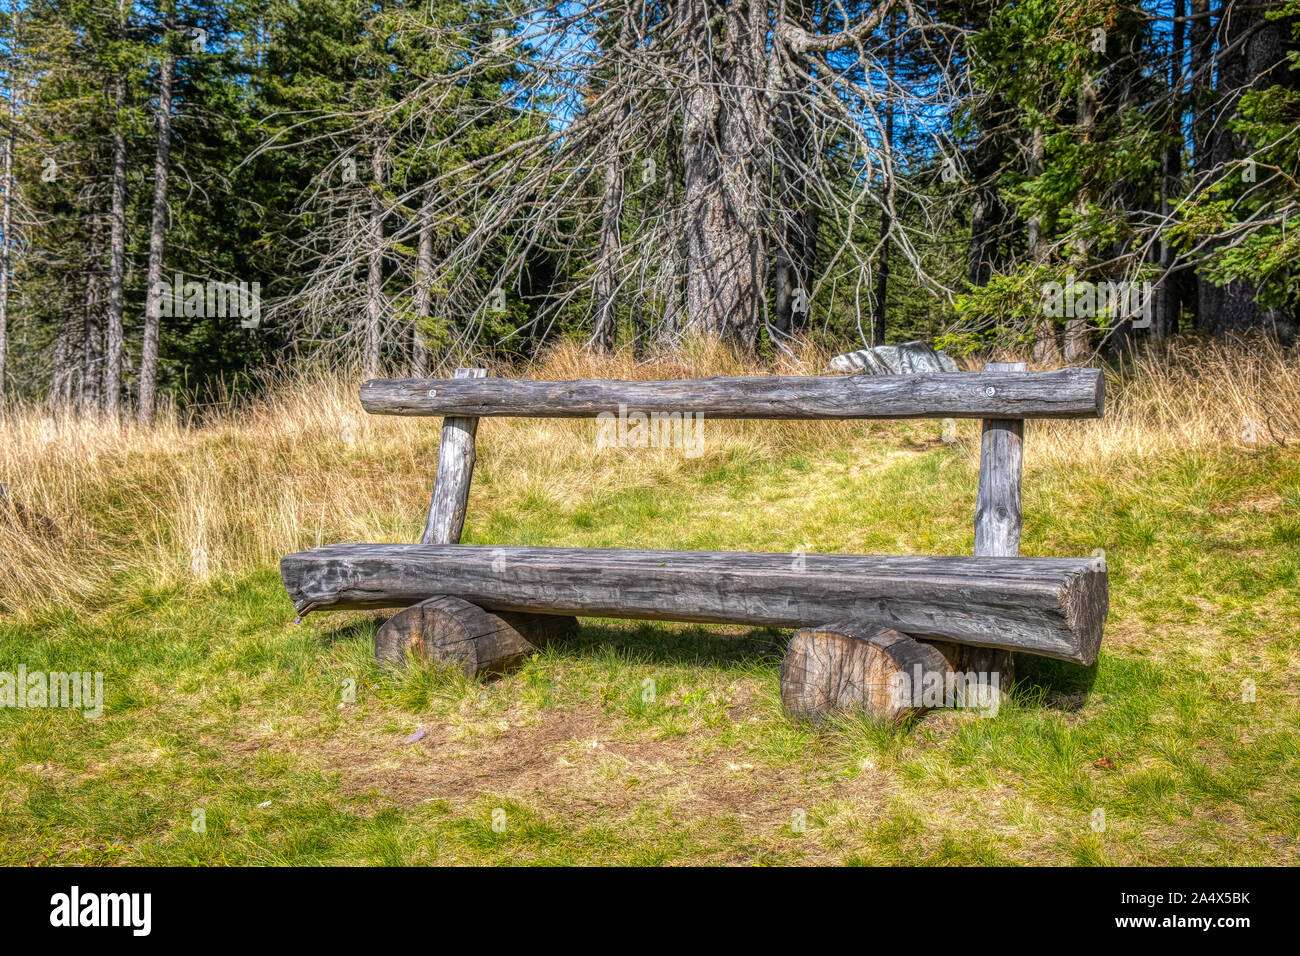 Wooden bench in the woods, sunnz meadow and trees in background, solitude, tranquilitz and peace in nature Stock Photo